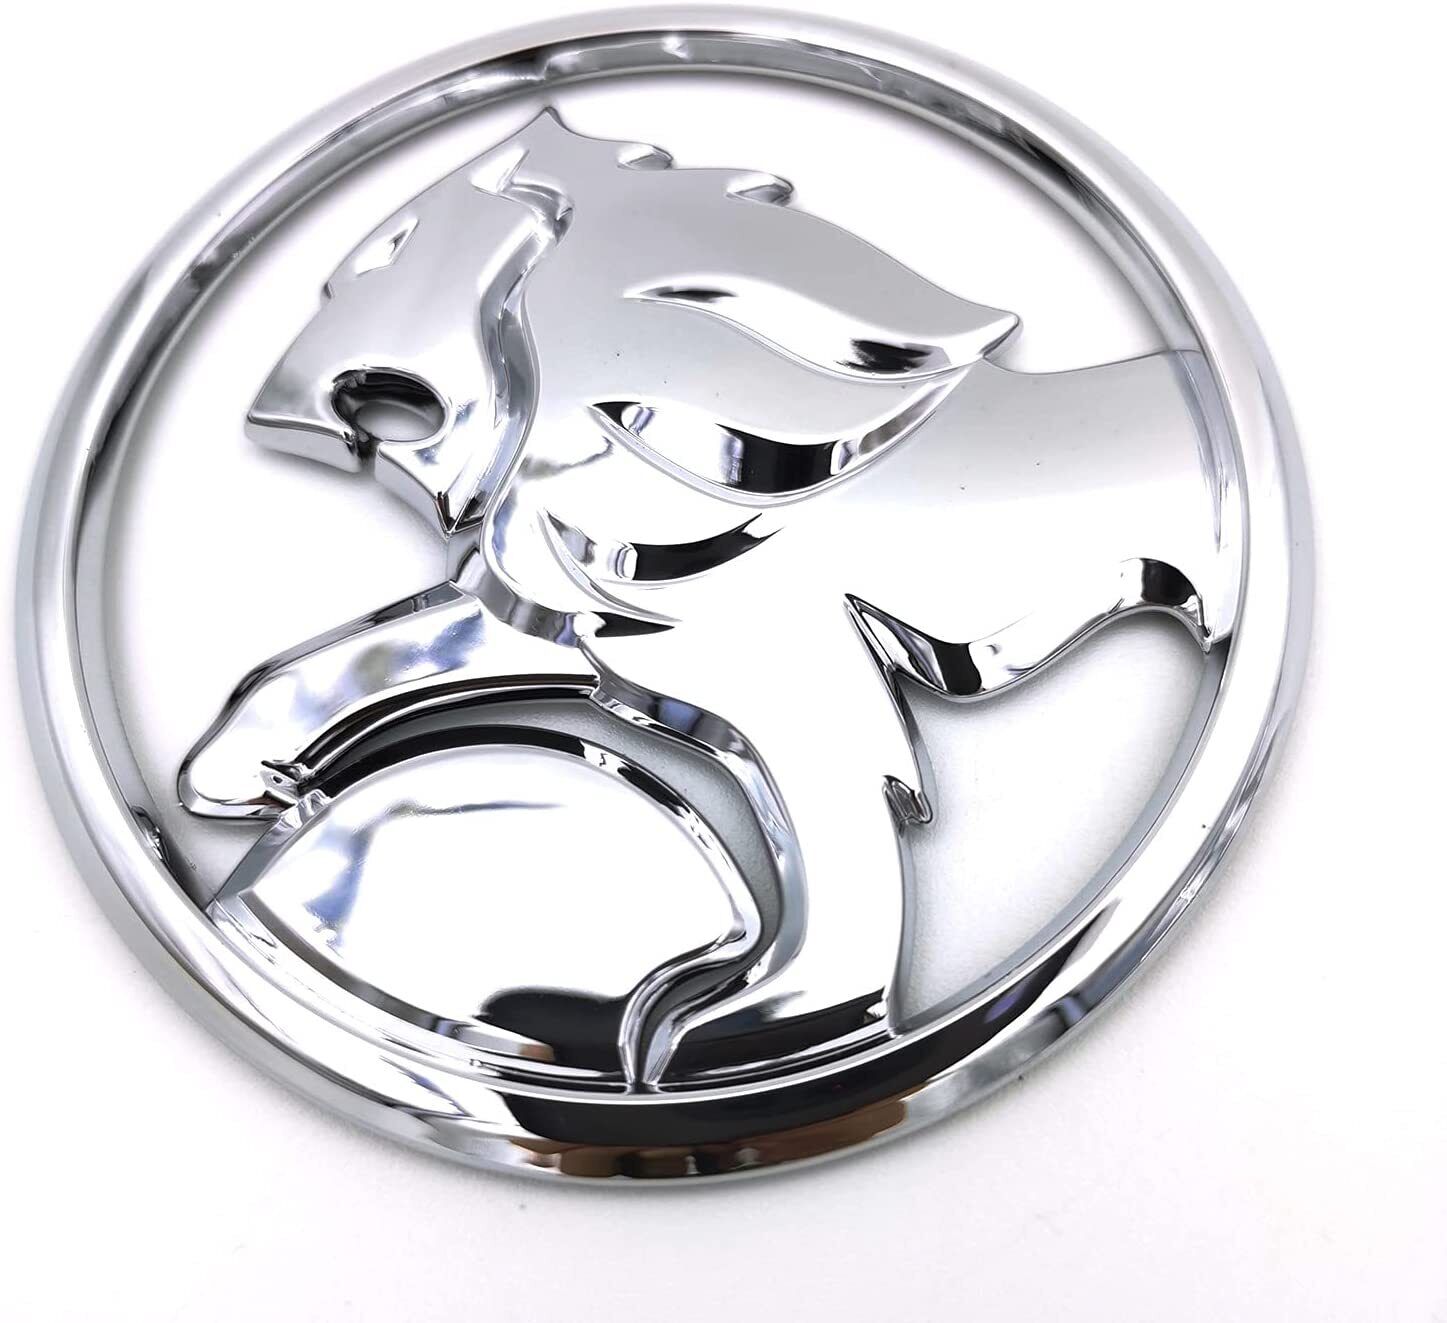 Chrome Lion Holden Badge Tailgate/Boot Lid Emblem Commodore Malloo HSV D-69mm